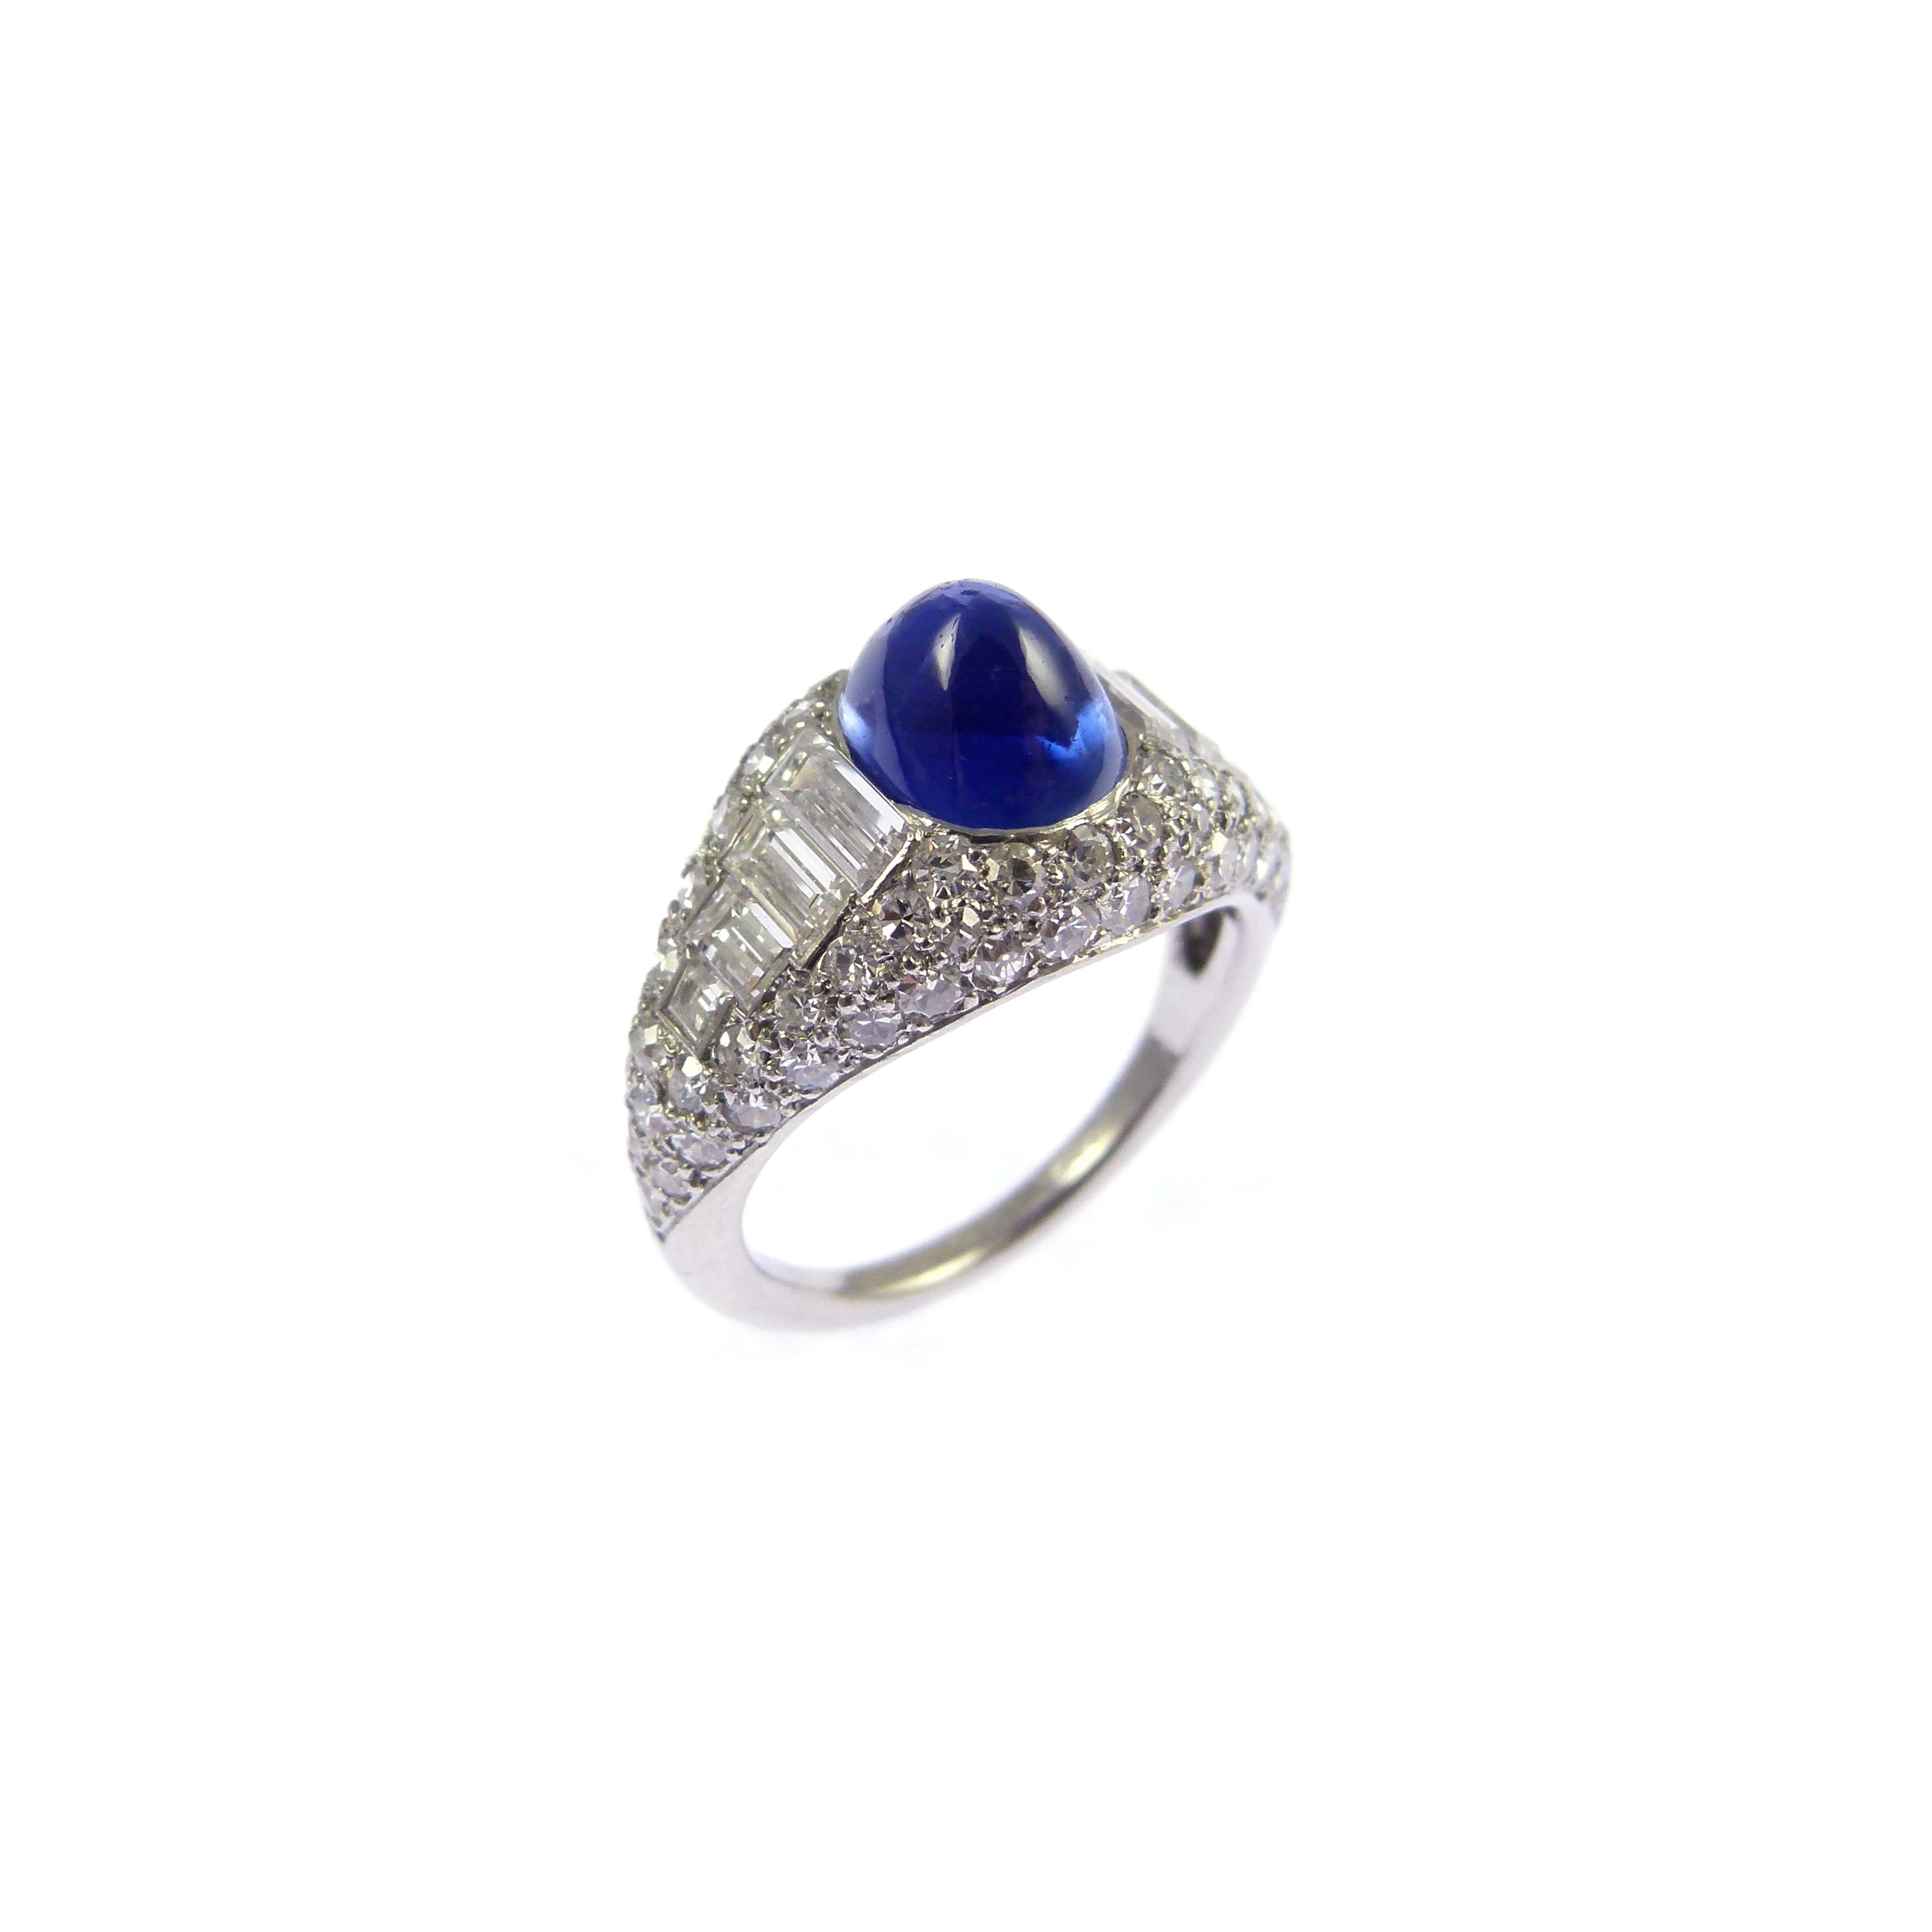 Cabochon sapphire and diamond cluster 